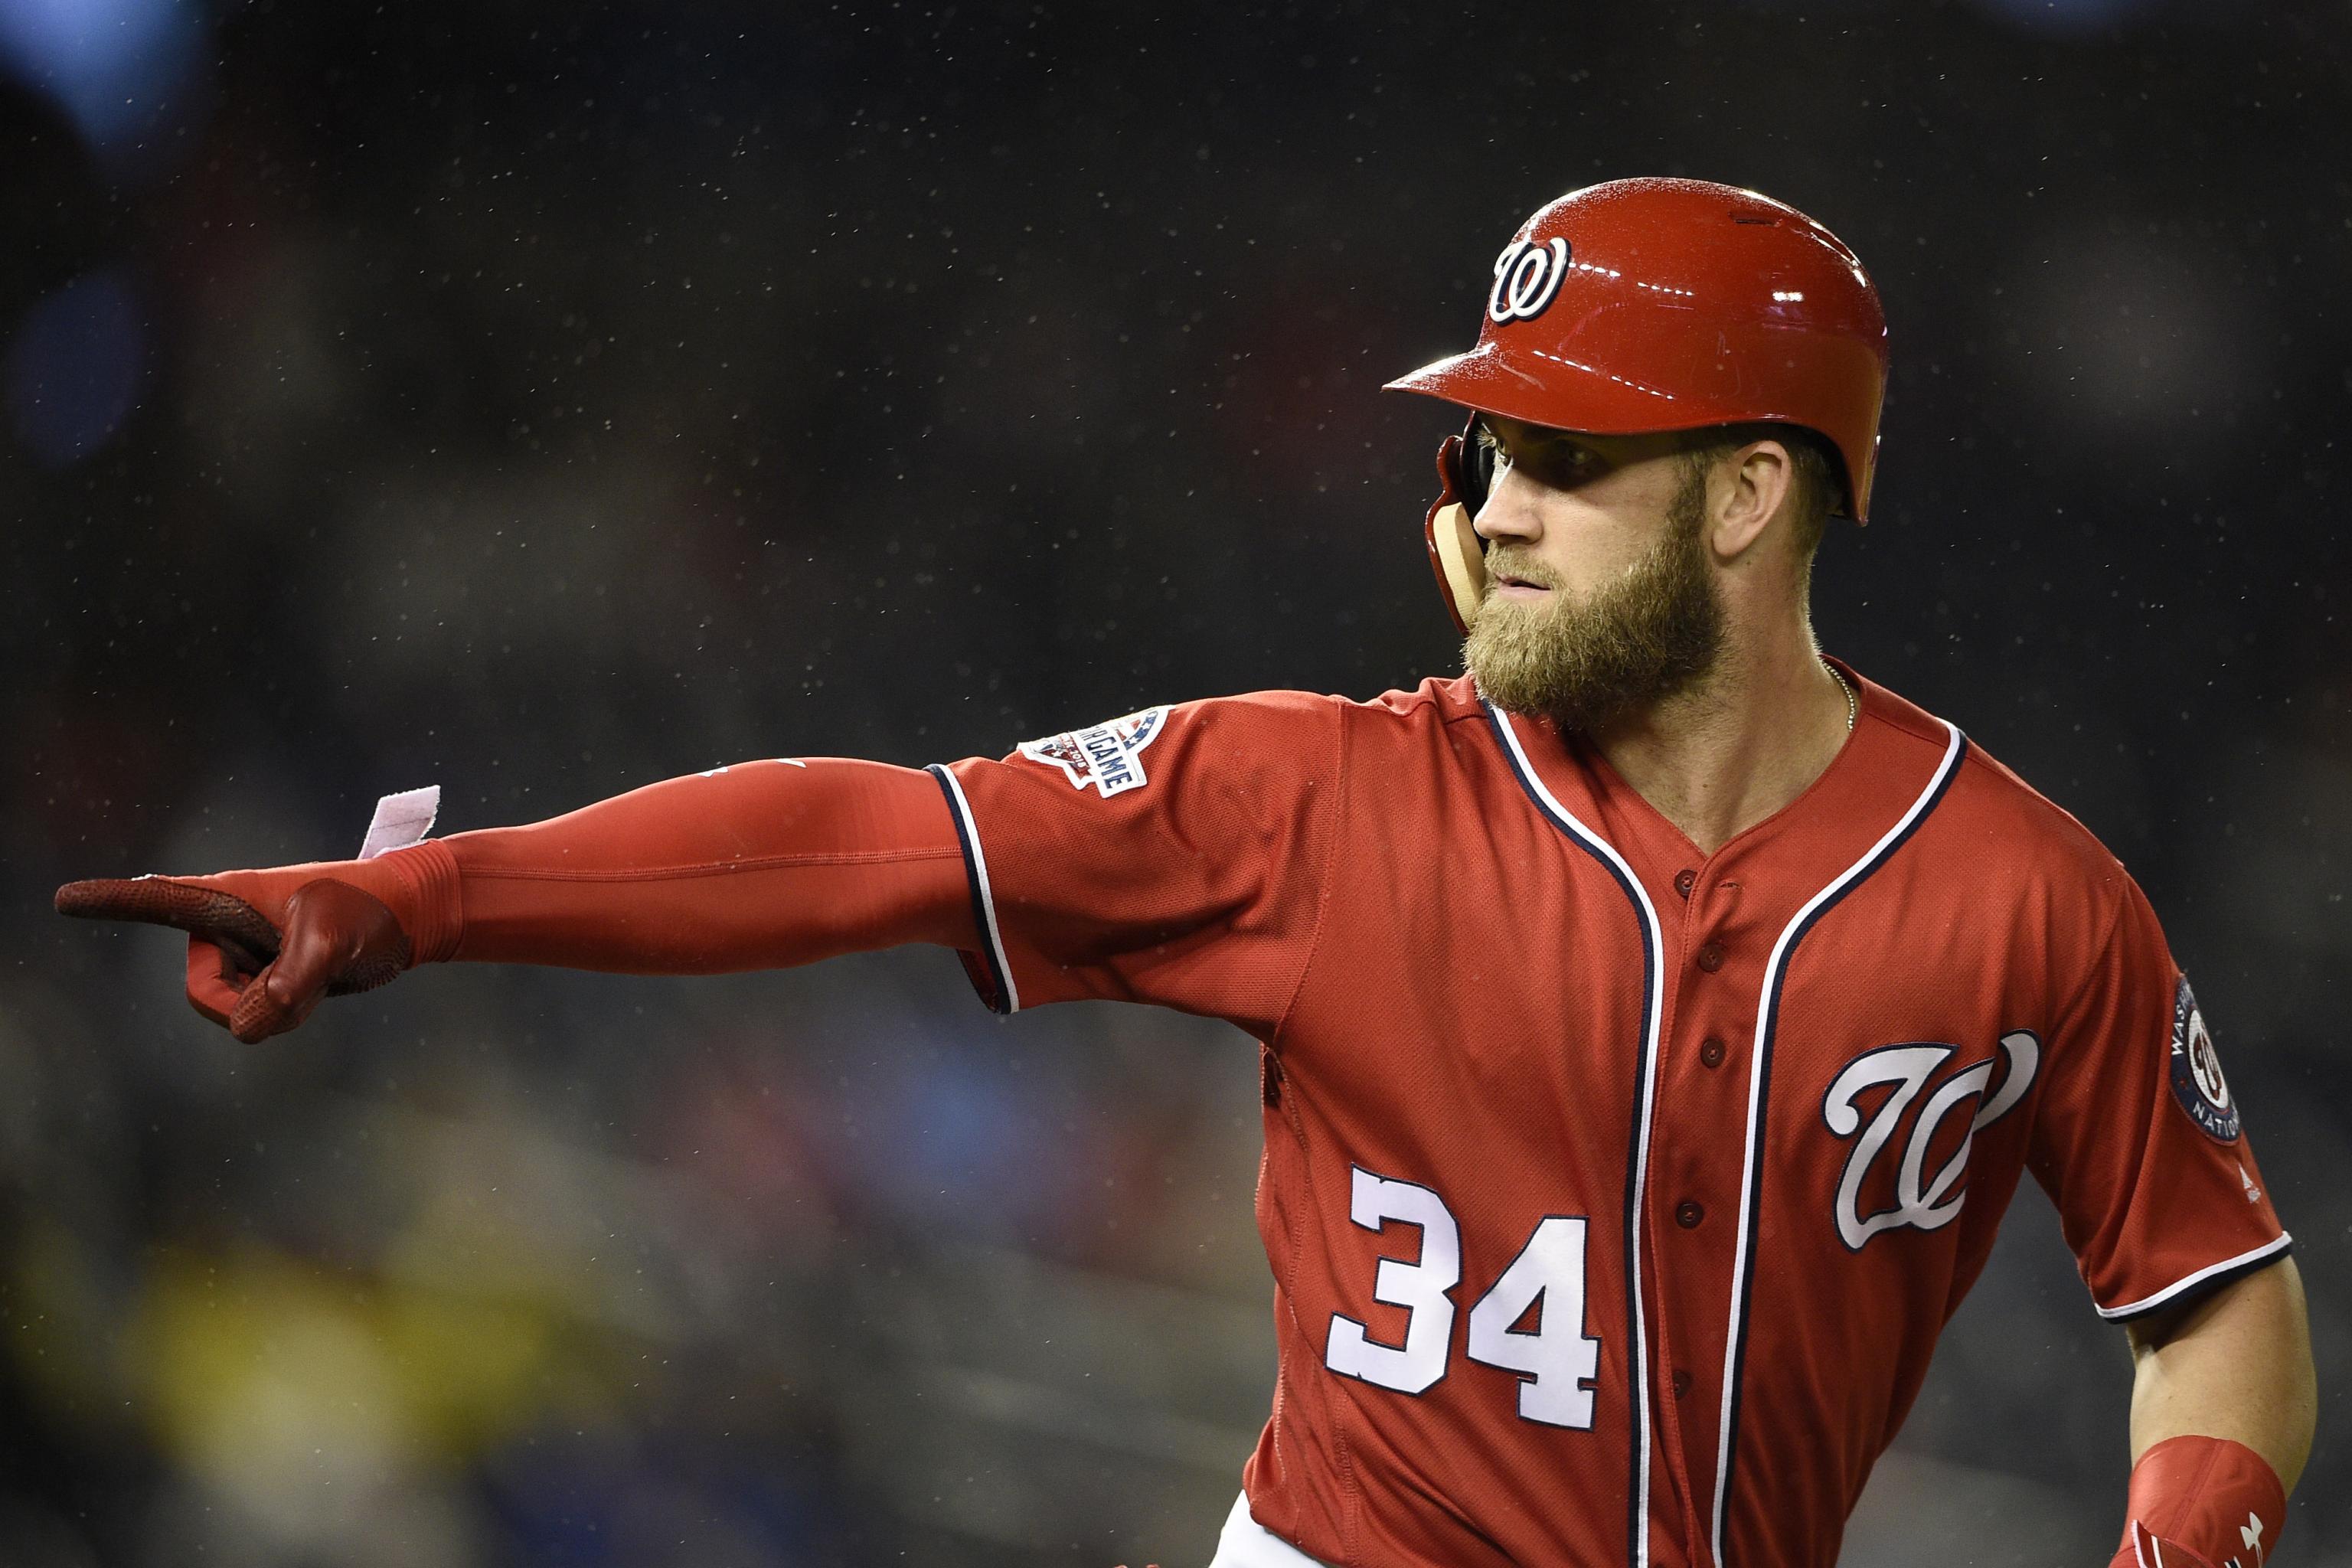 Report: Padres not ruling out Bryce Harper after signing Machado